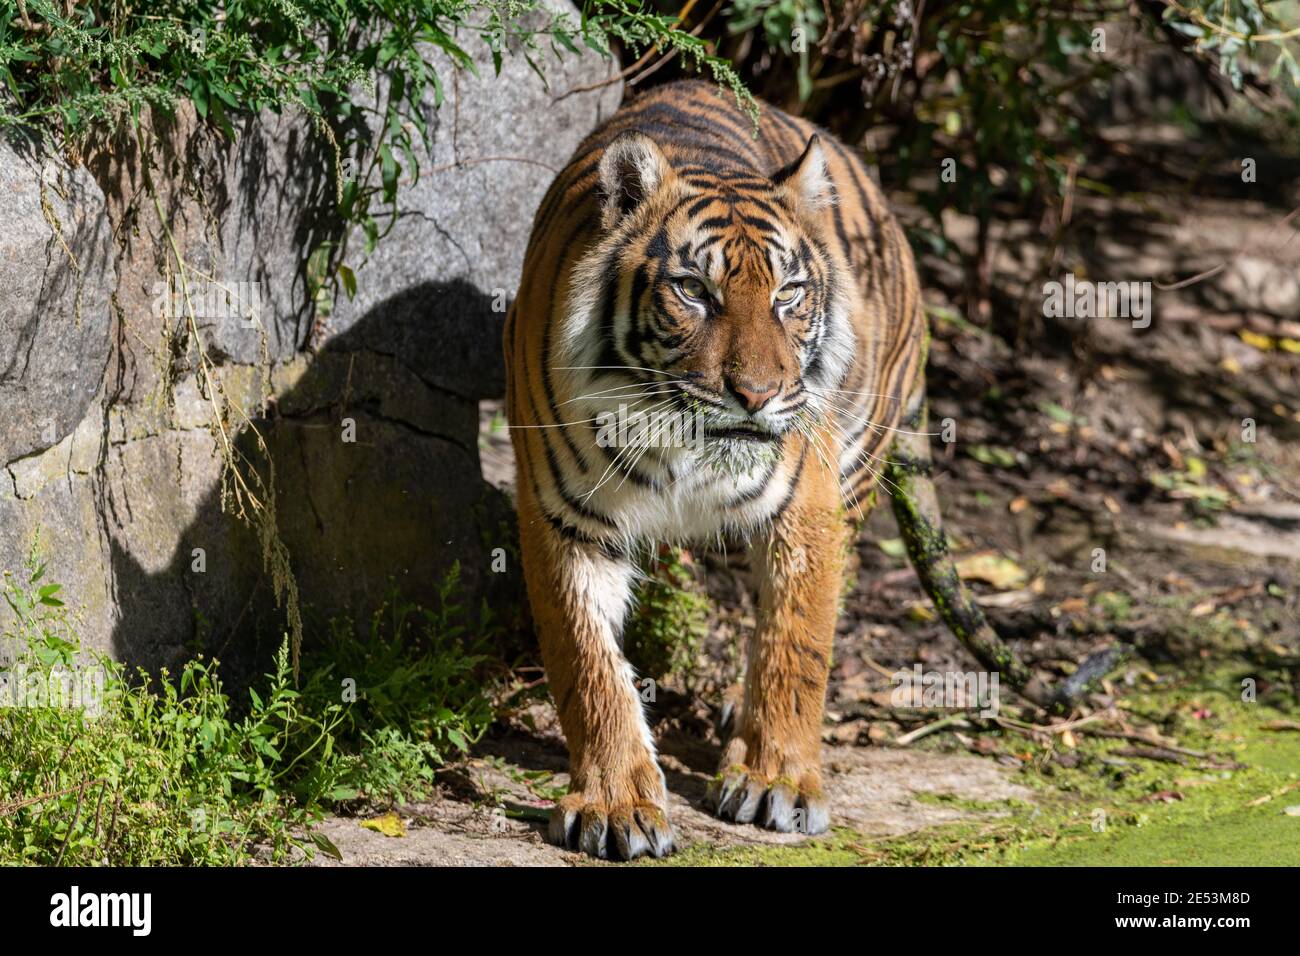 Tiger standing on the shore with water lentils (common duckweed) on him in the bright sunlight, having wet fur from going into the water Stock Photo